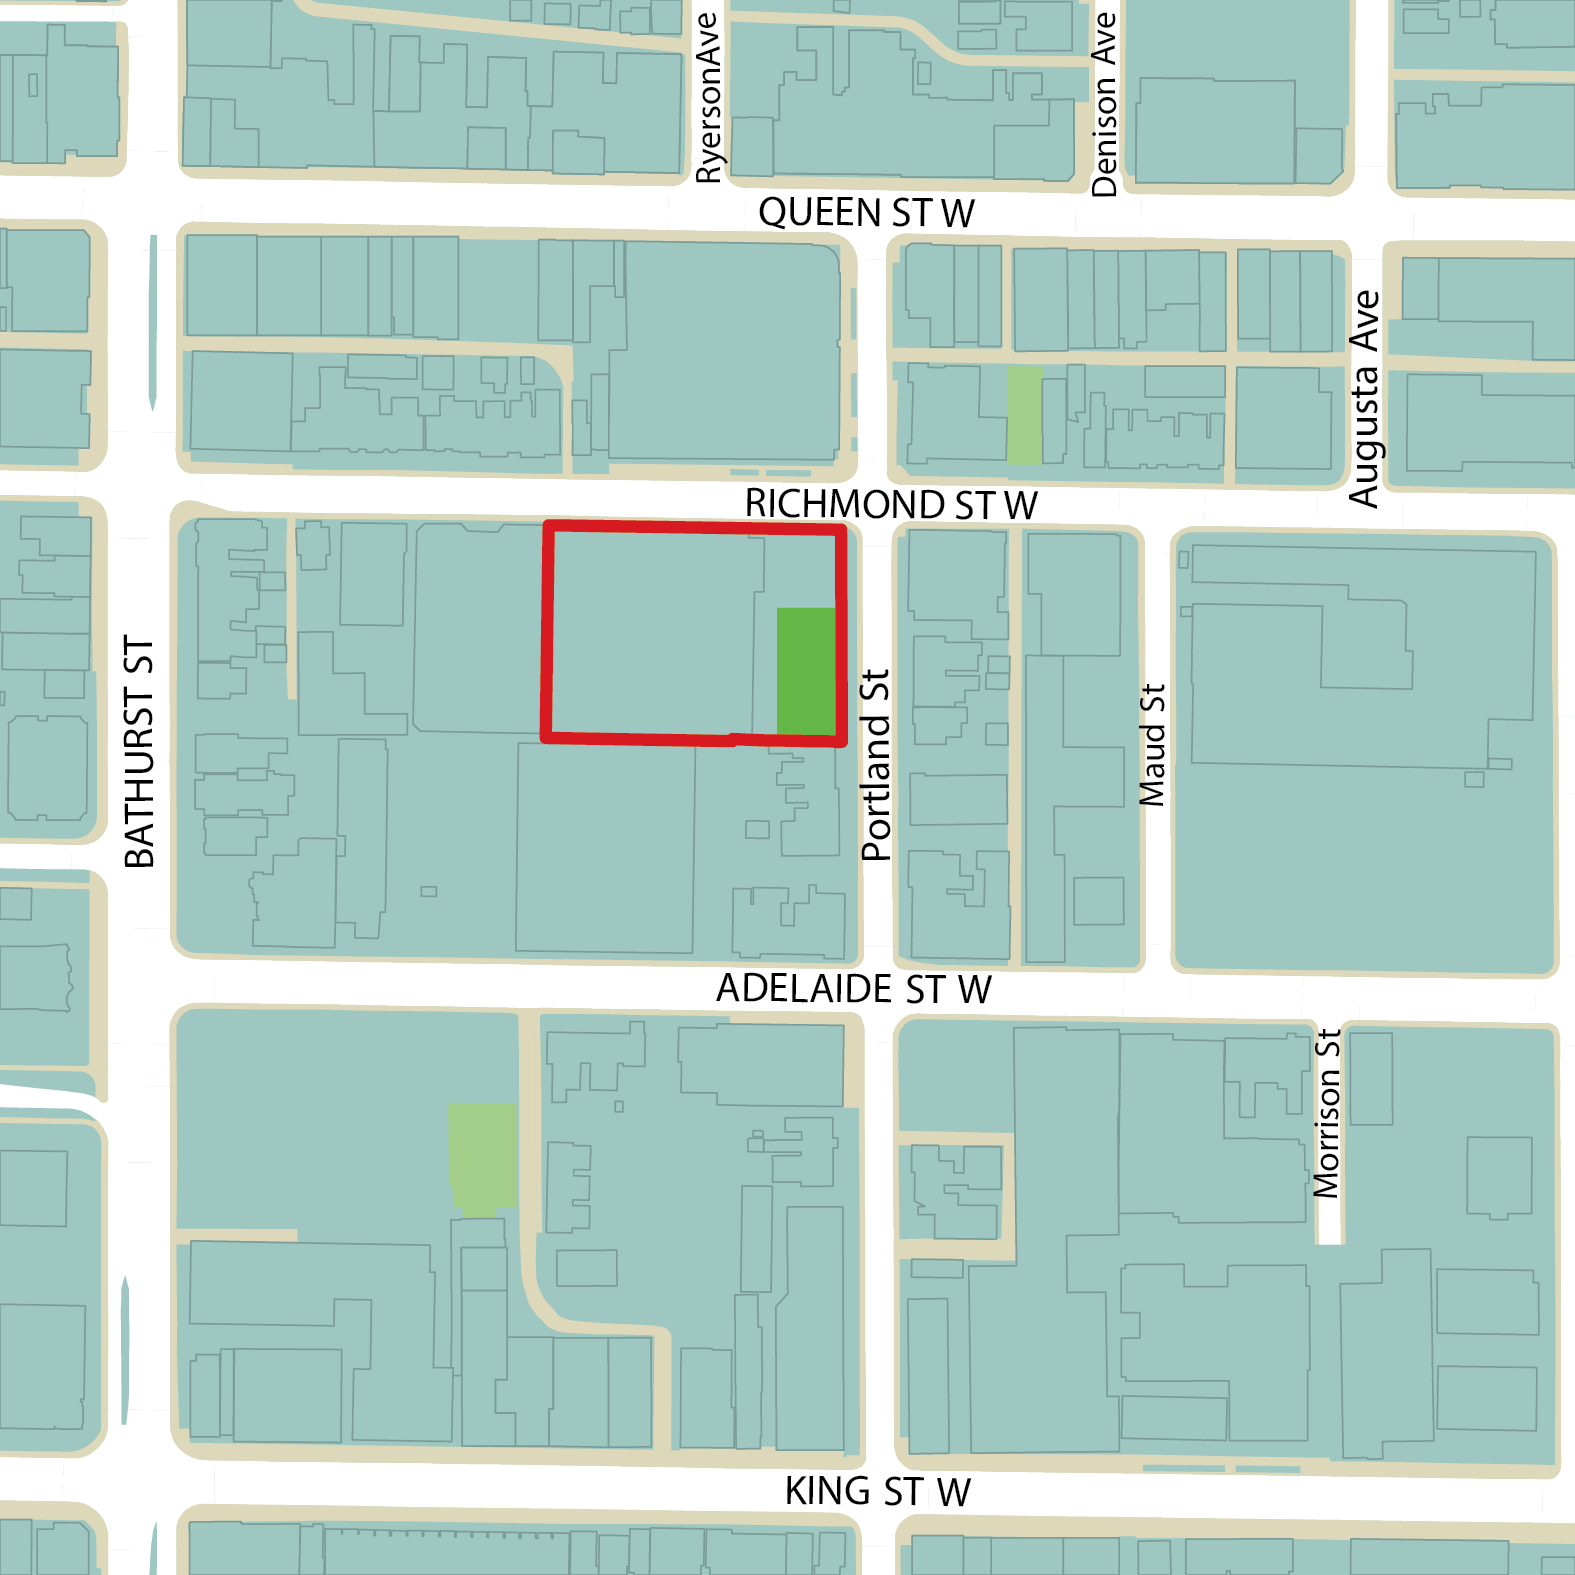 Aerial map showing the location of the new park on Portland Street, south of Richmond Street West. There is a red box around the larger development site, with the new park site shaded in green.